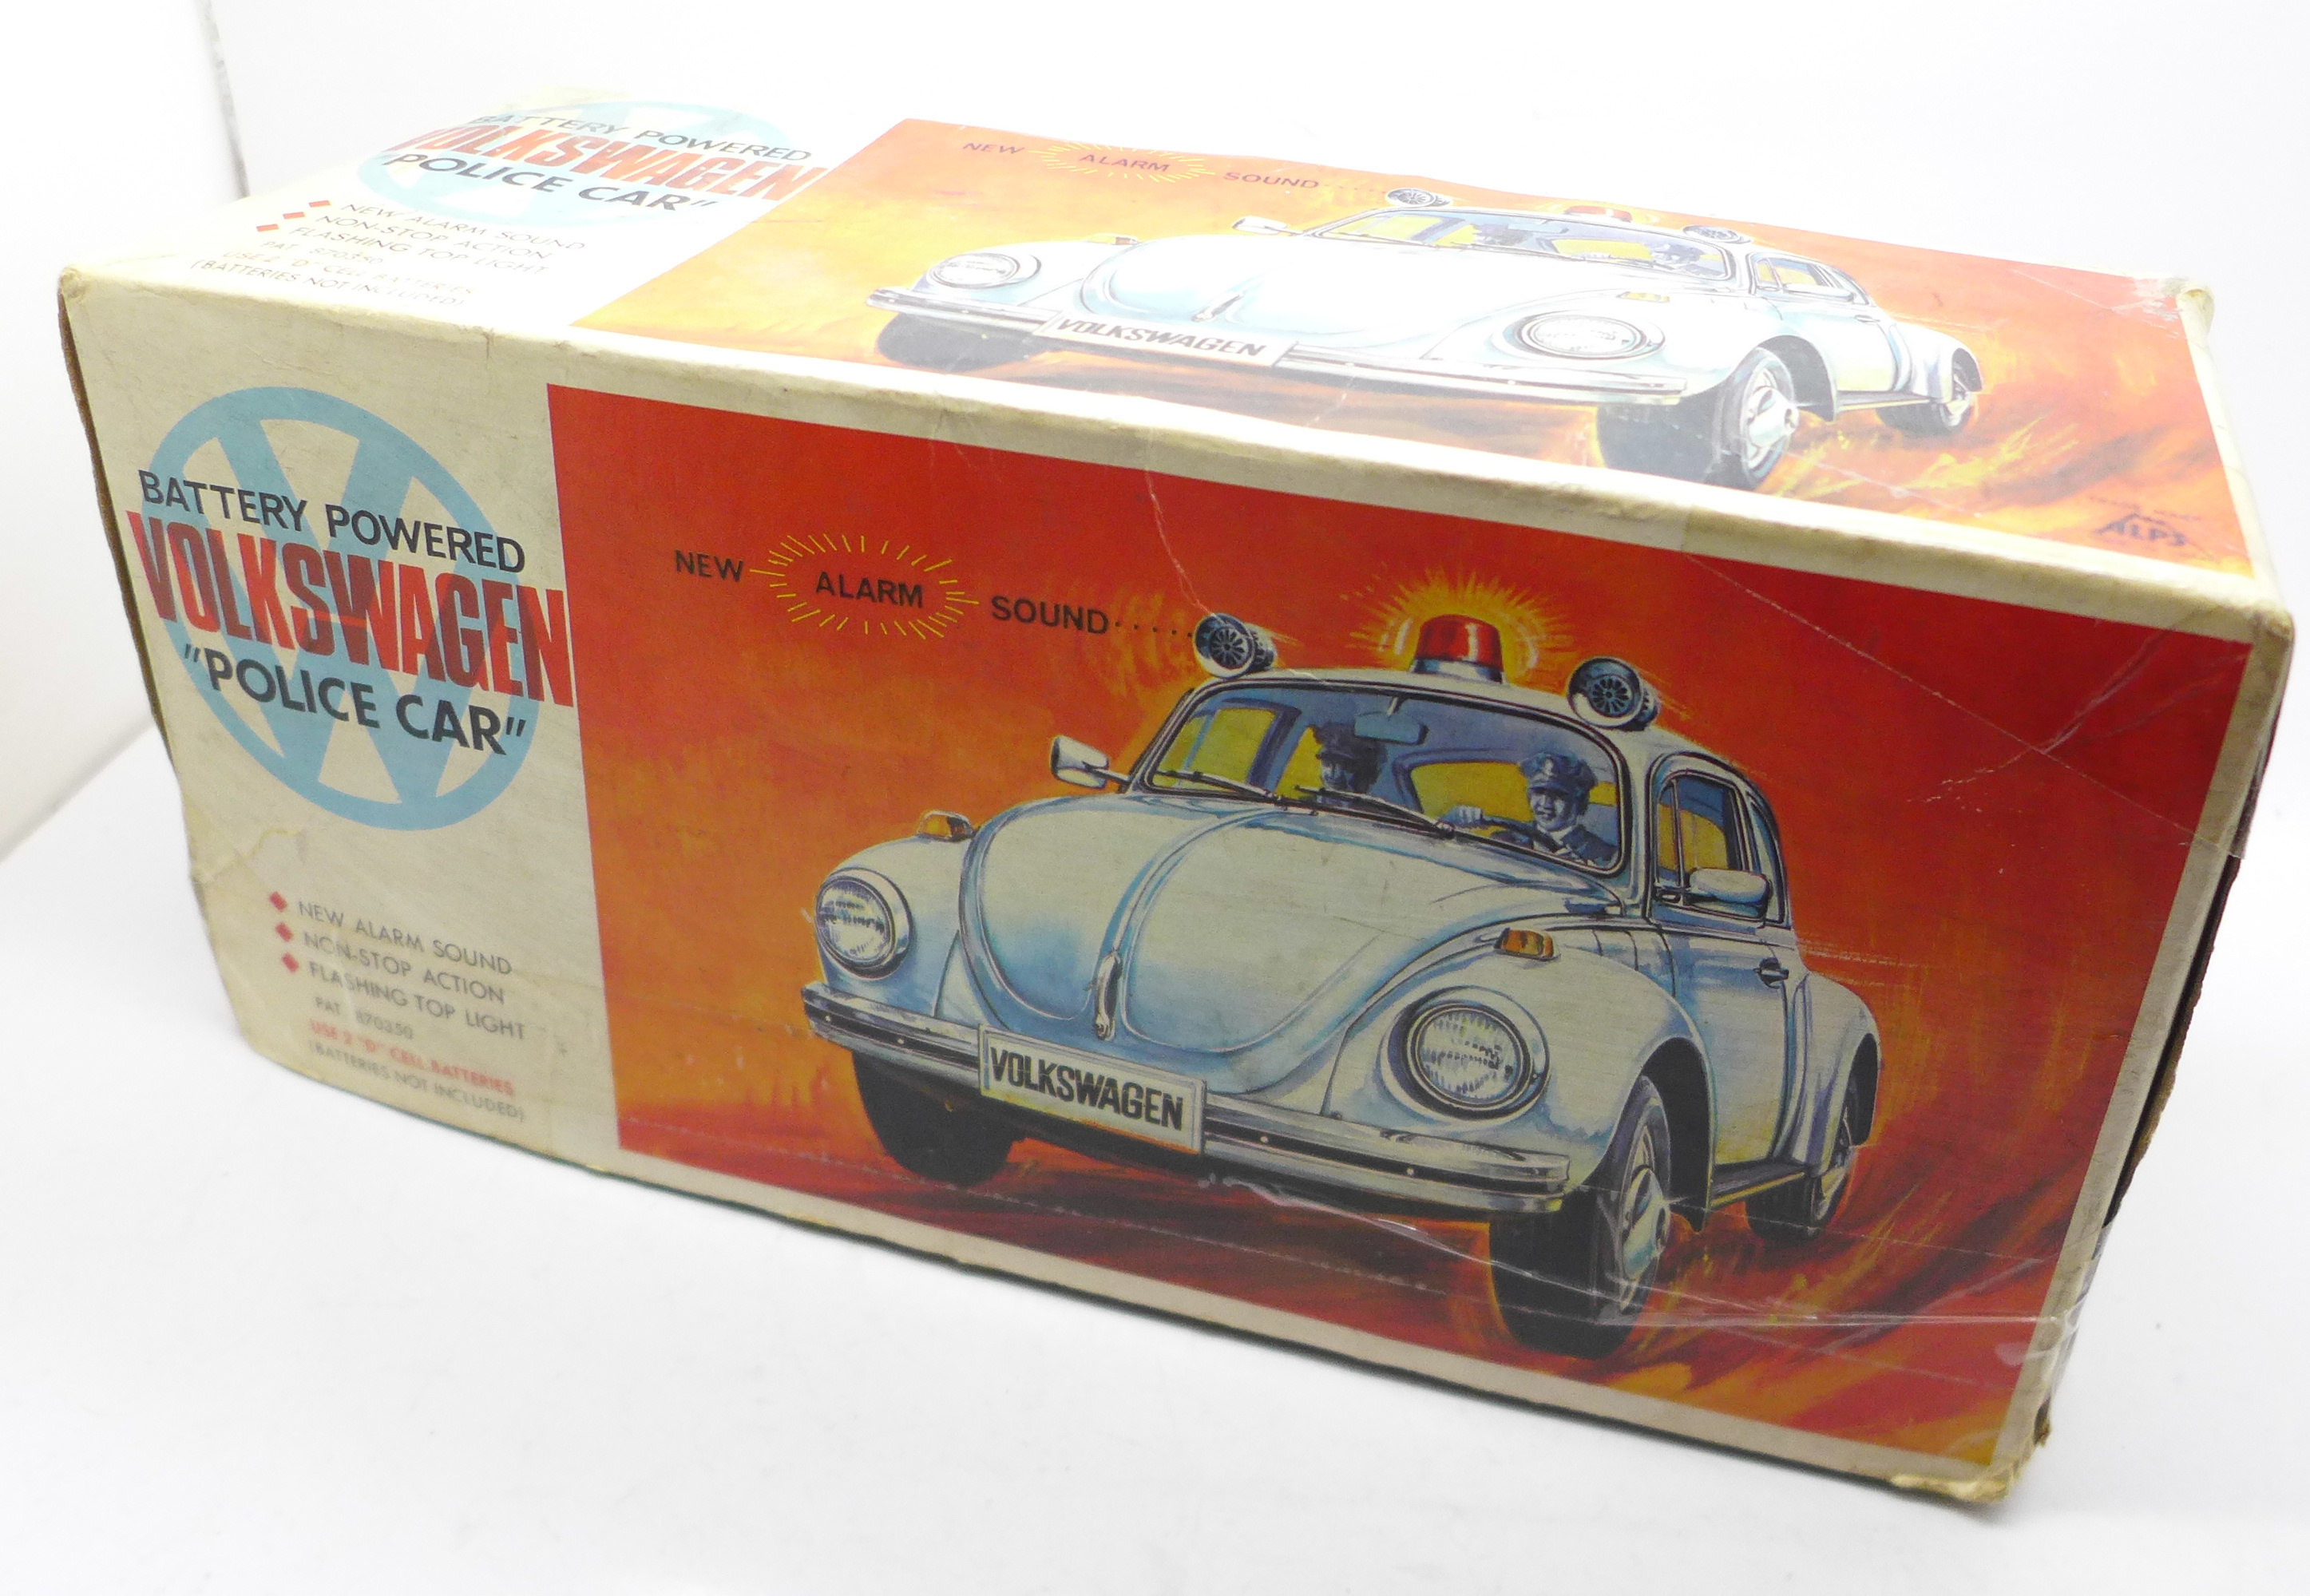 An Alps battery operated Volkswagen Police car, boxed, - Image 4 of 5